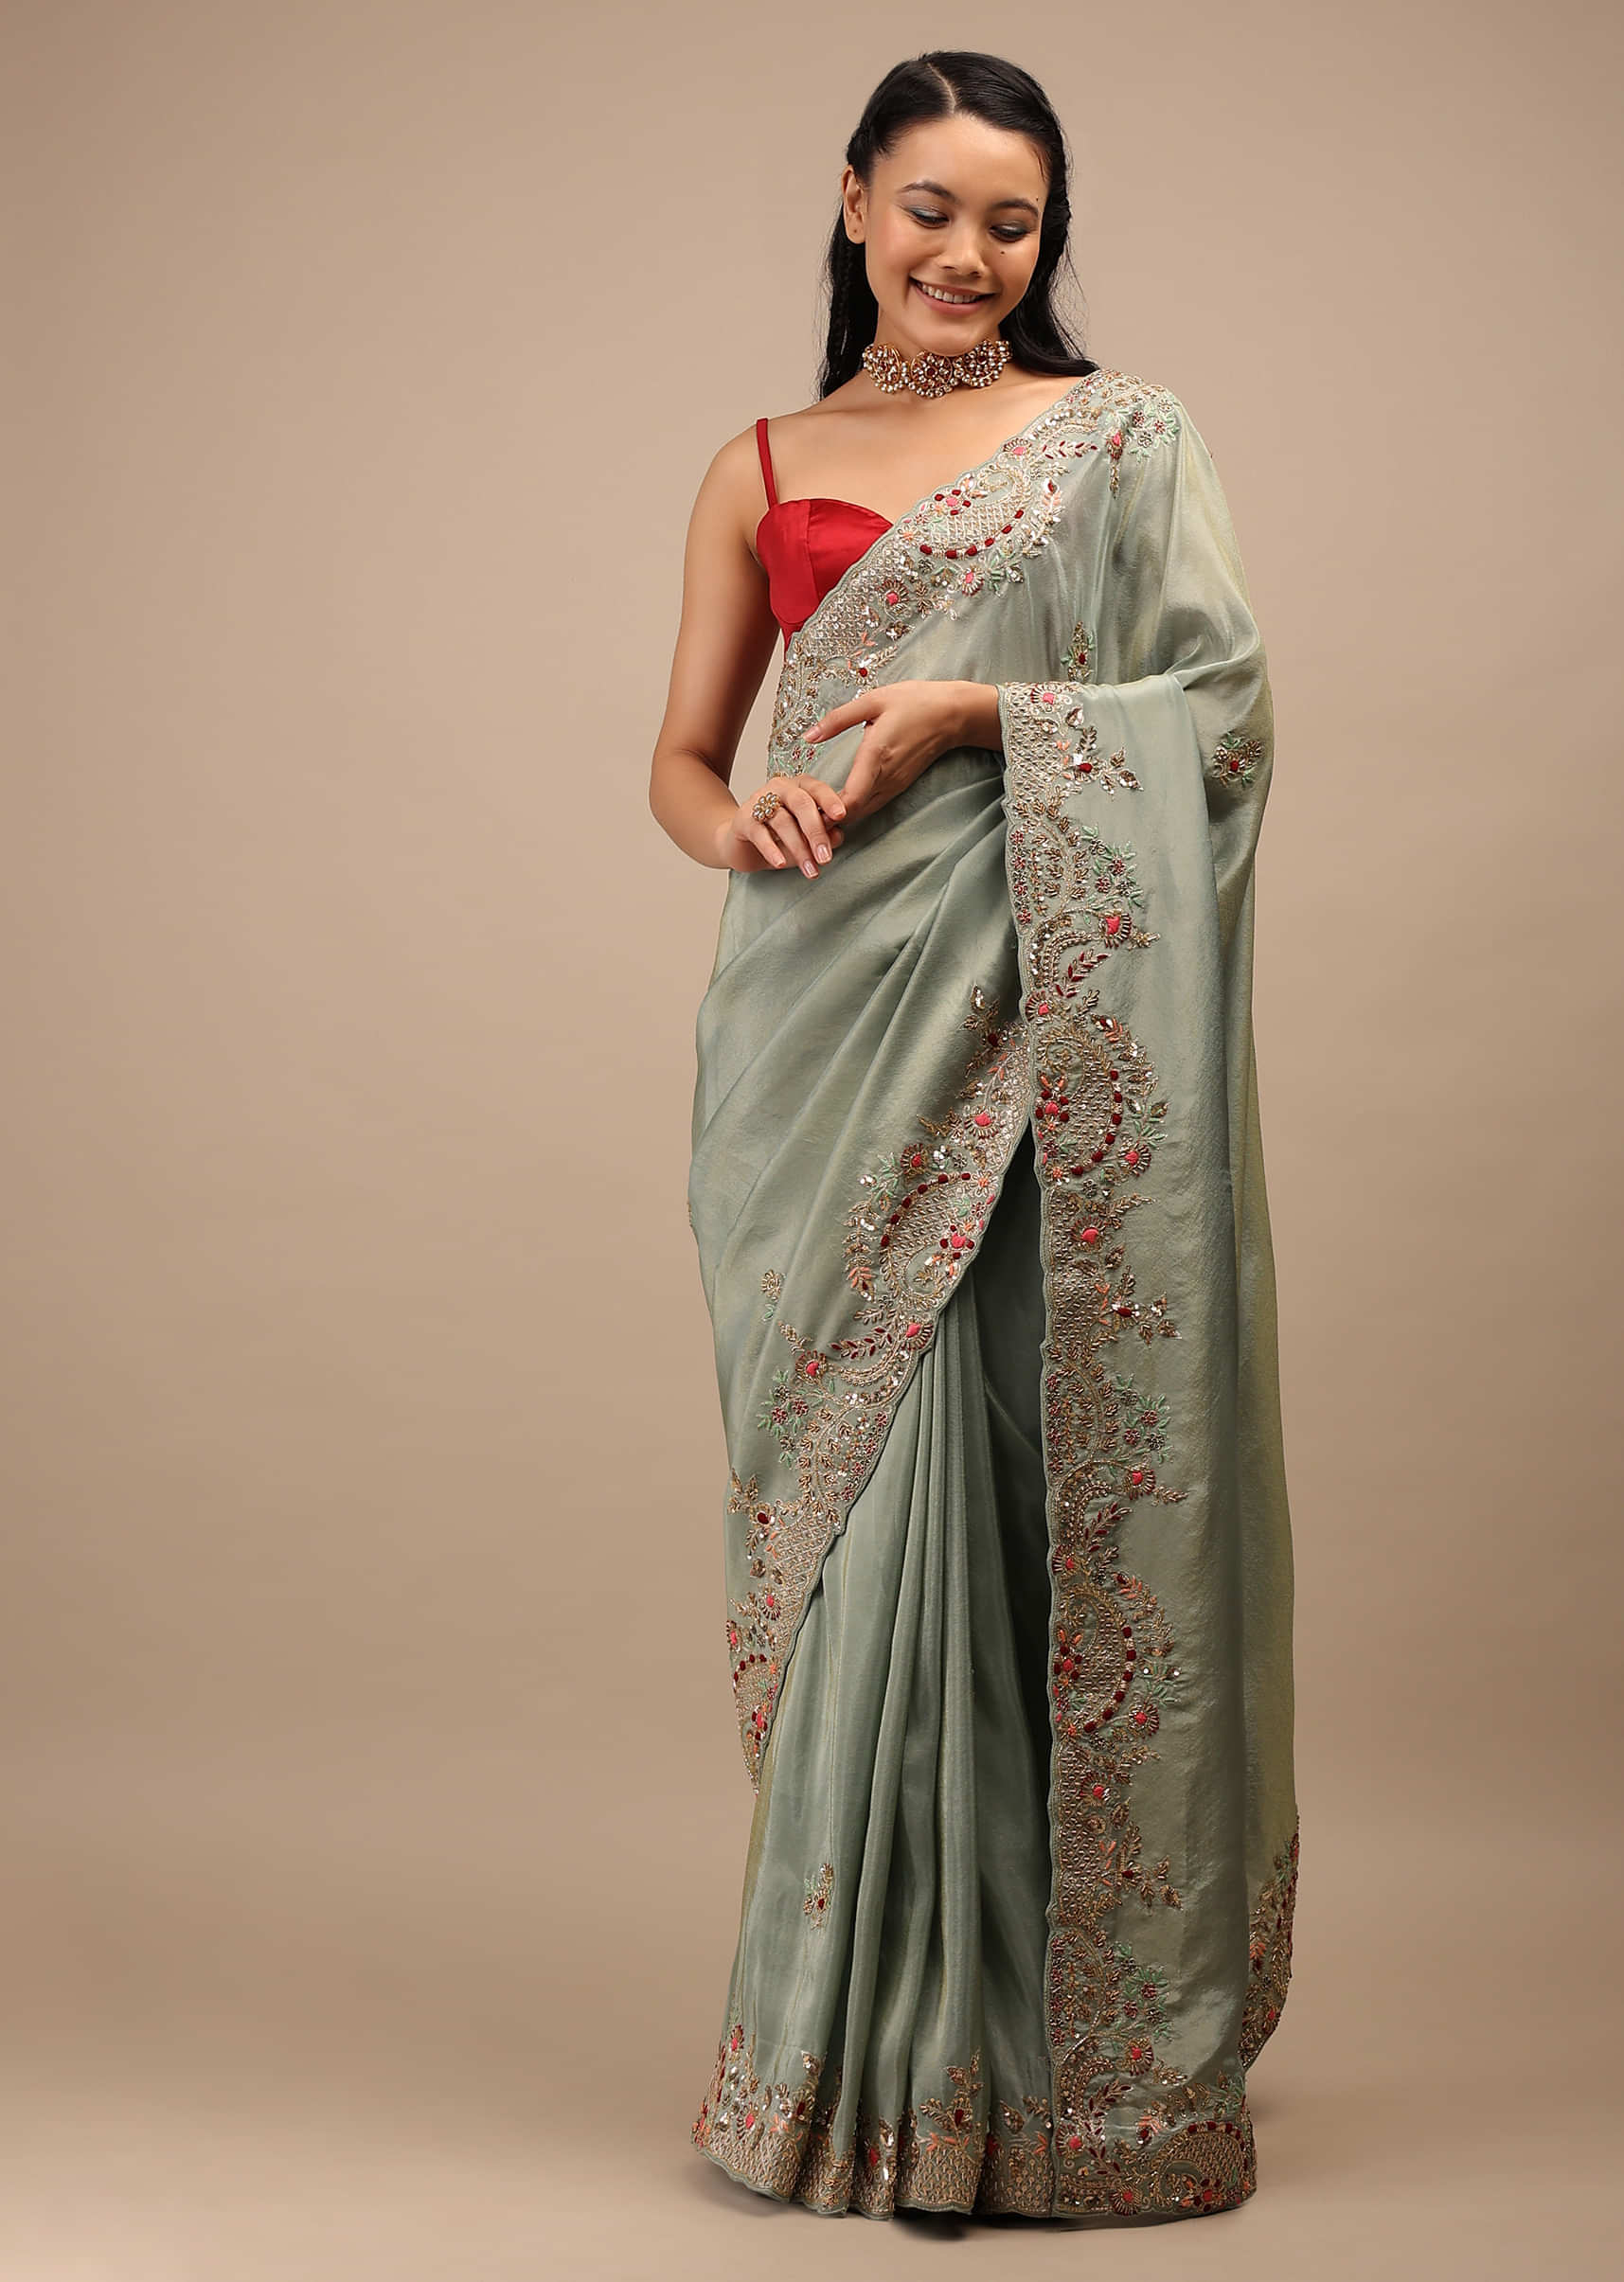 Iceberg Shimmer Saree In Cut Dana And Resham Embroidery Buttis, Cutwork Embroidery Border In Multi Color Resham And Beads